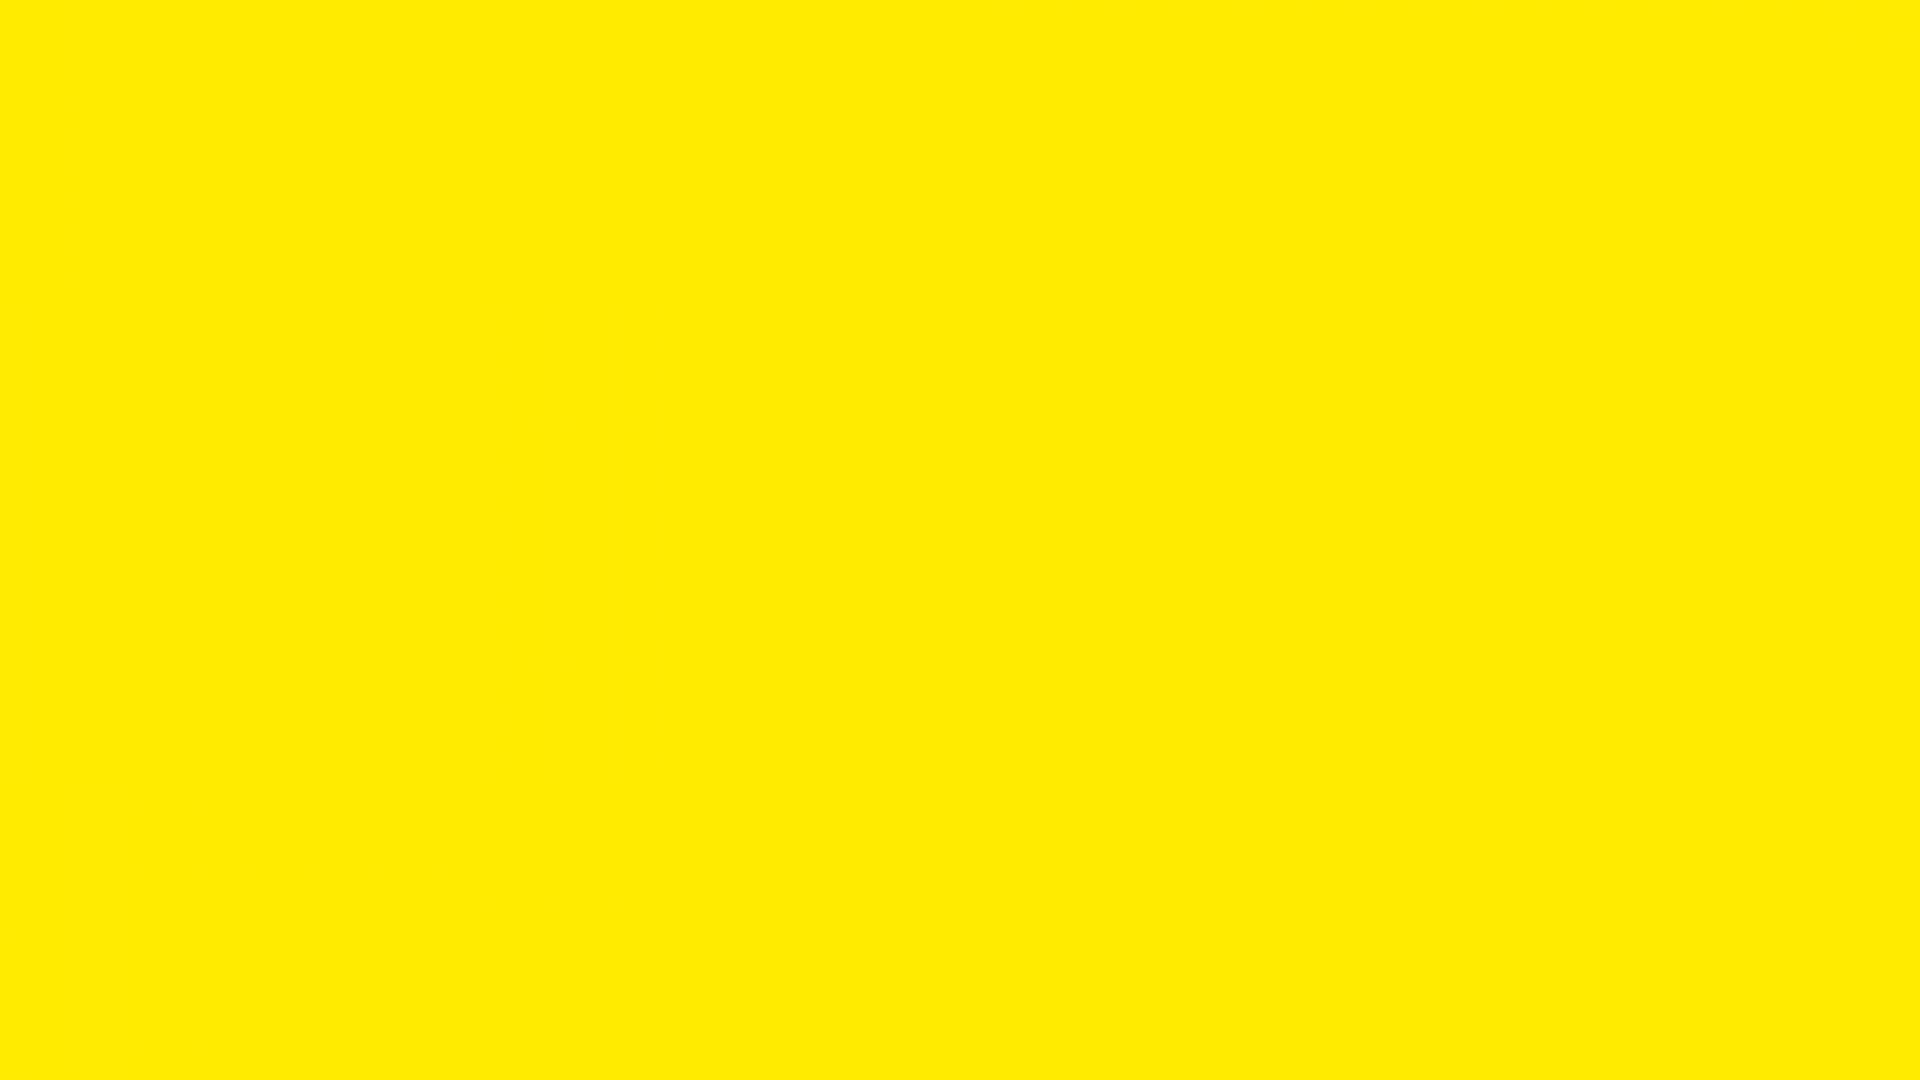 Plain Yellow Wallpaper with resolution 1920X1080 pixel. You can use this wallpaper as background for your desktop Computer Screensavers, Android or iPhone smartphones